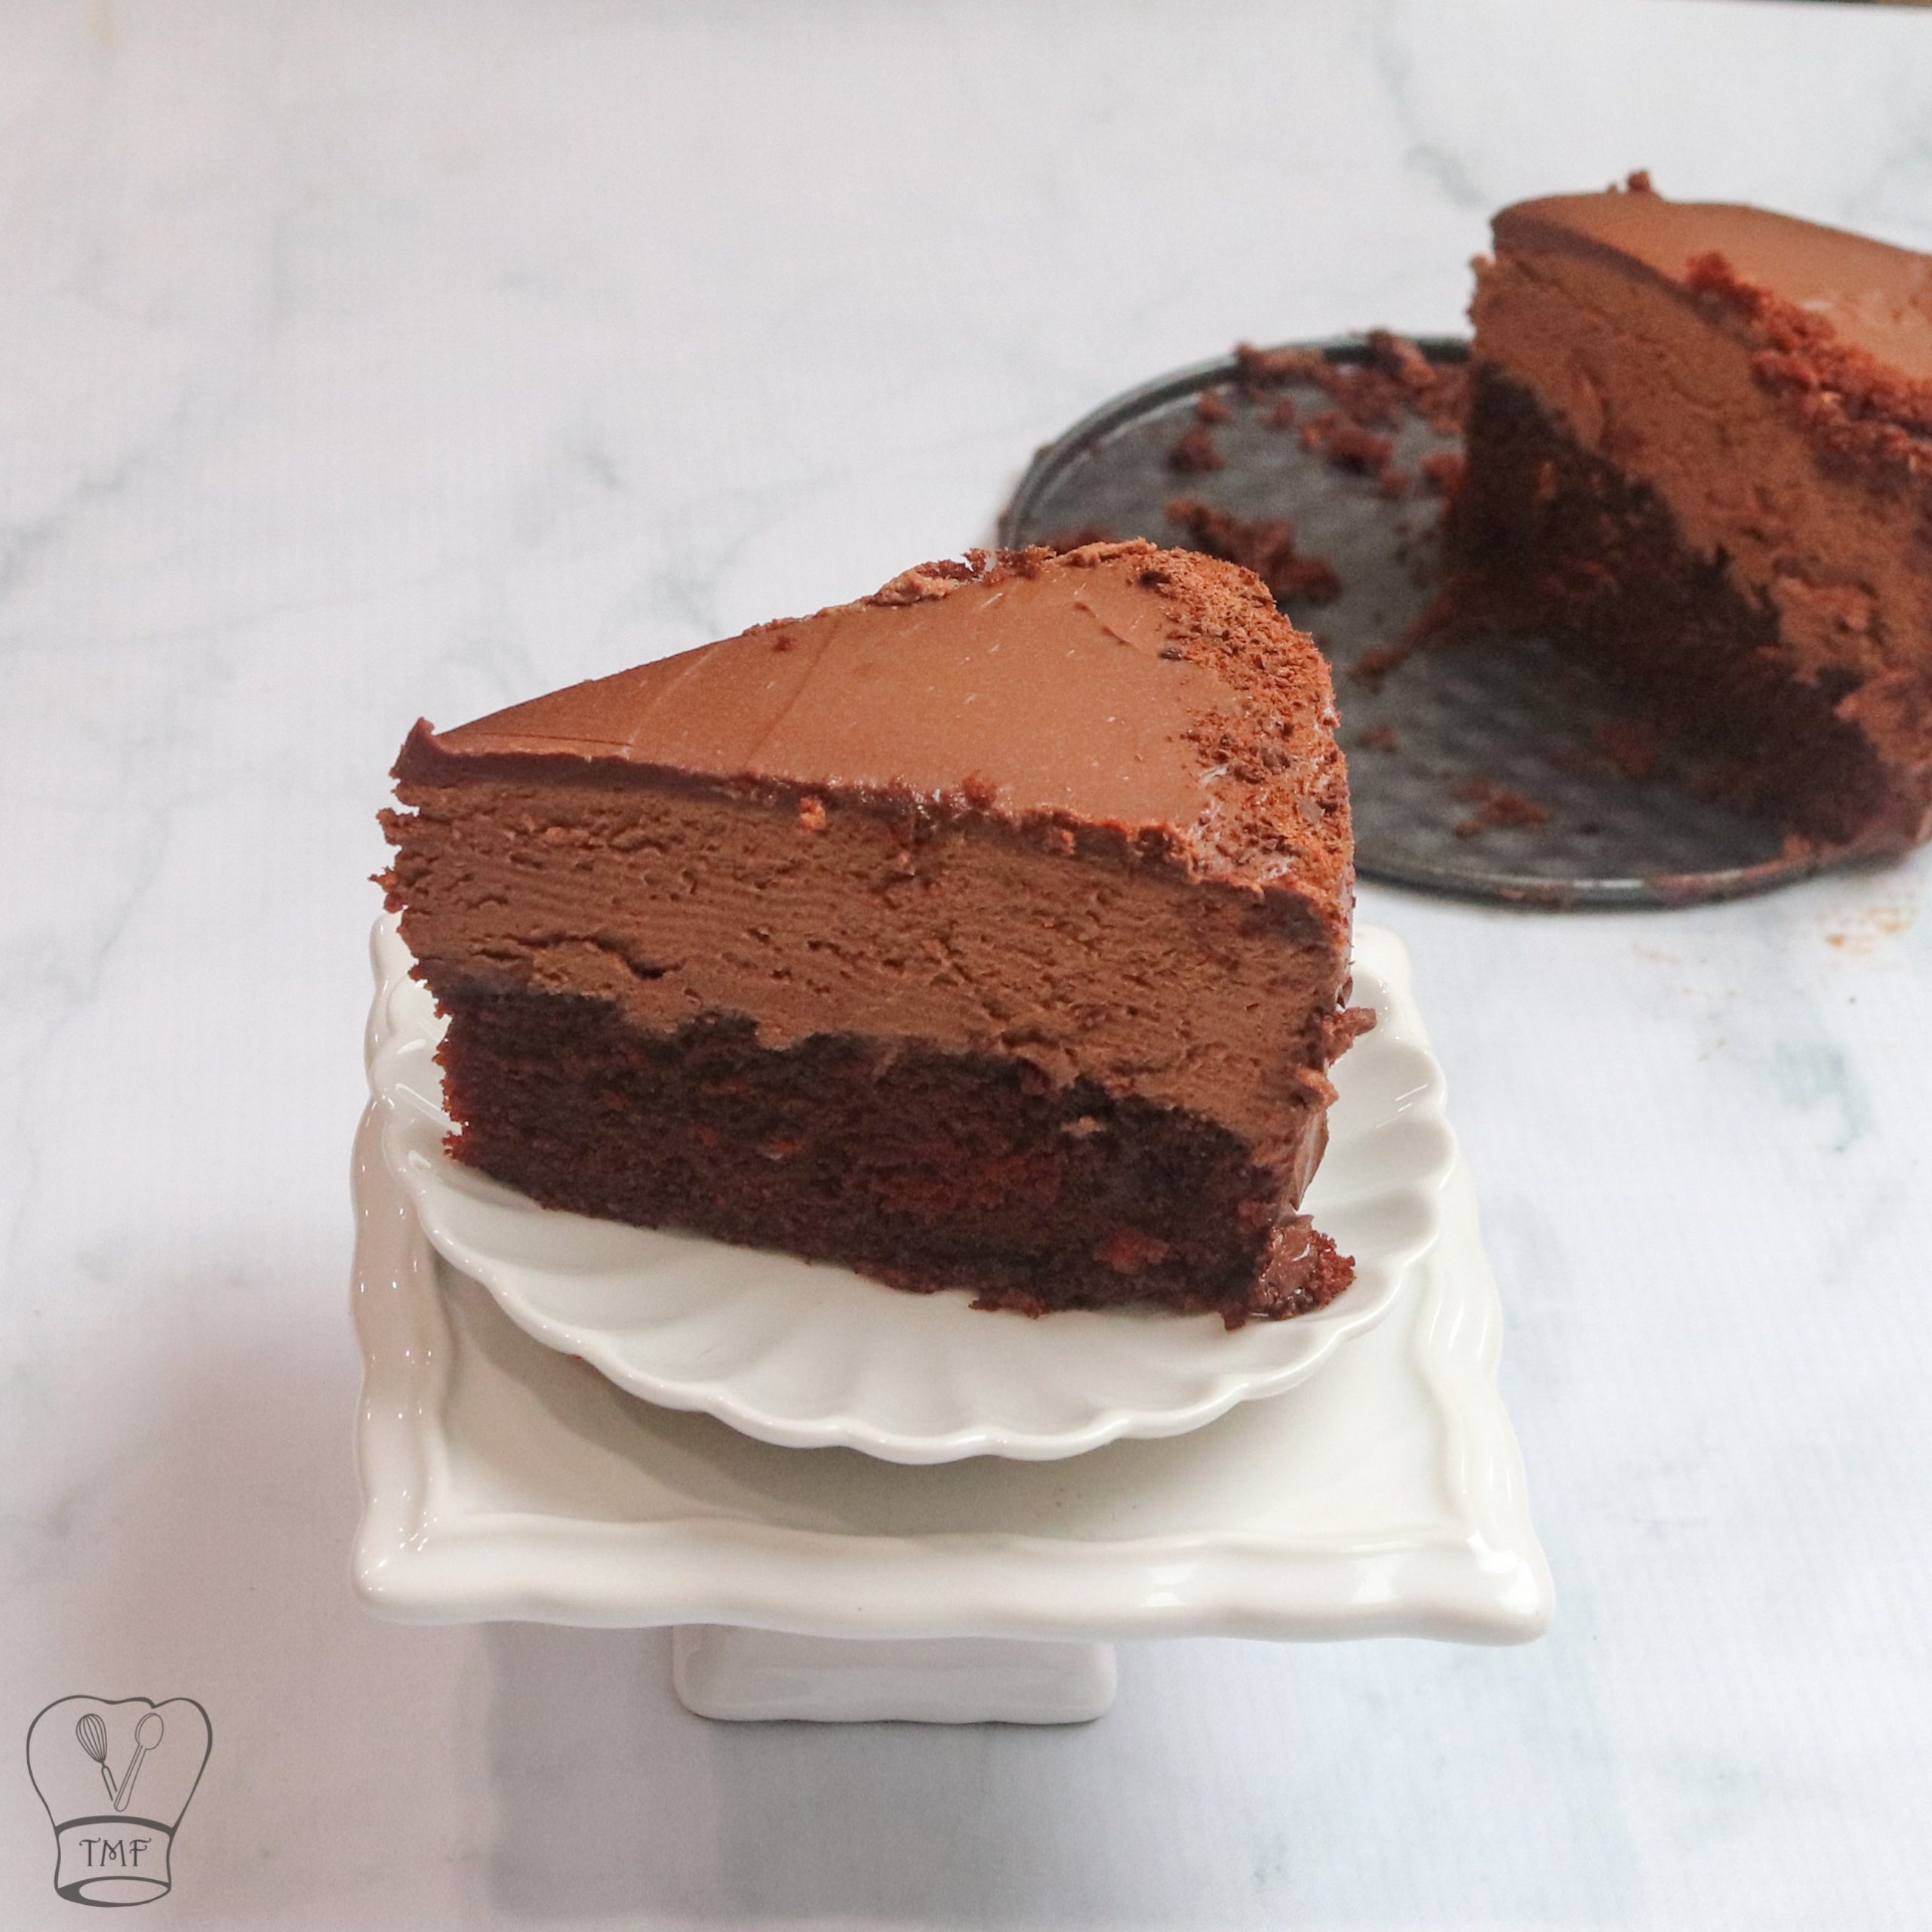 Mousse Cake Recipe (Chocolate) | The Kitchn